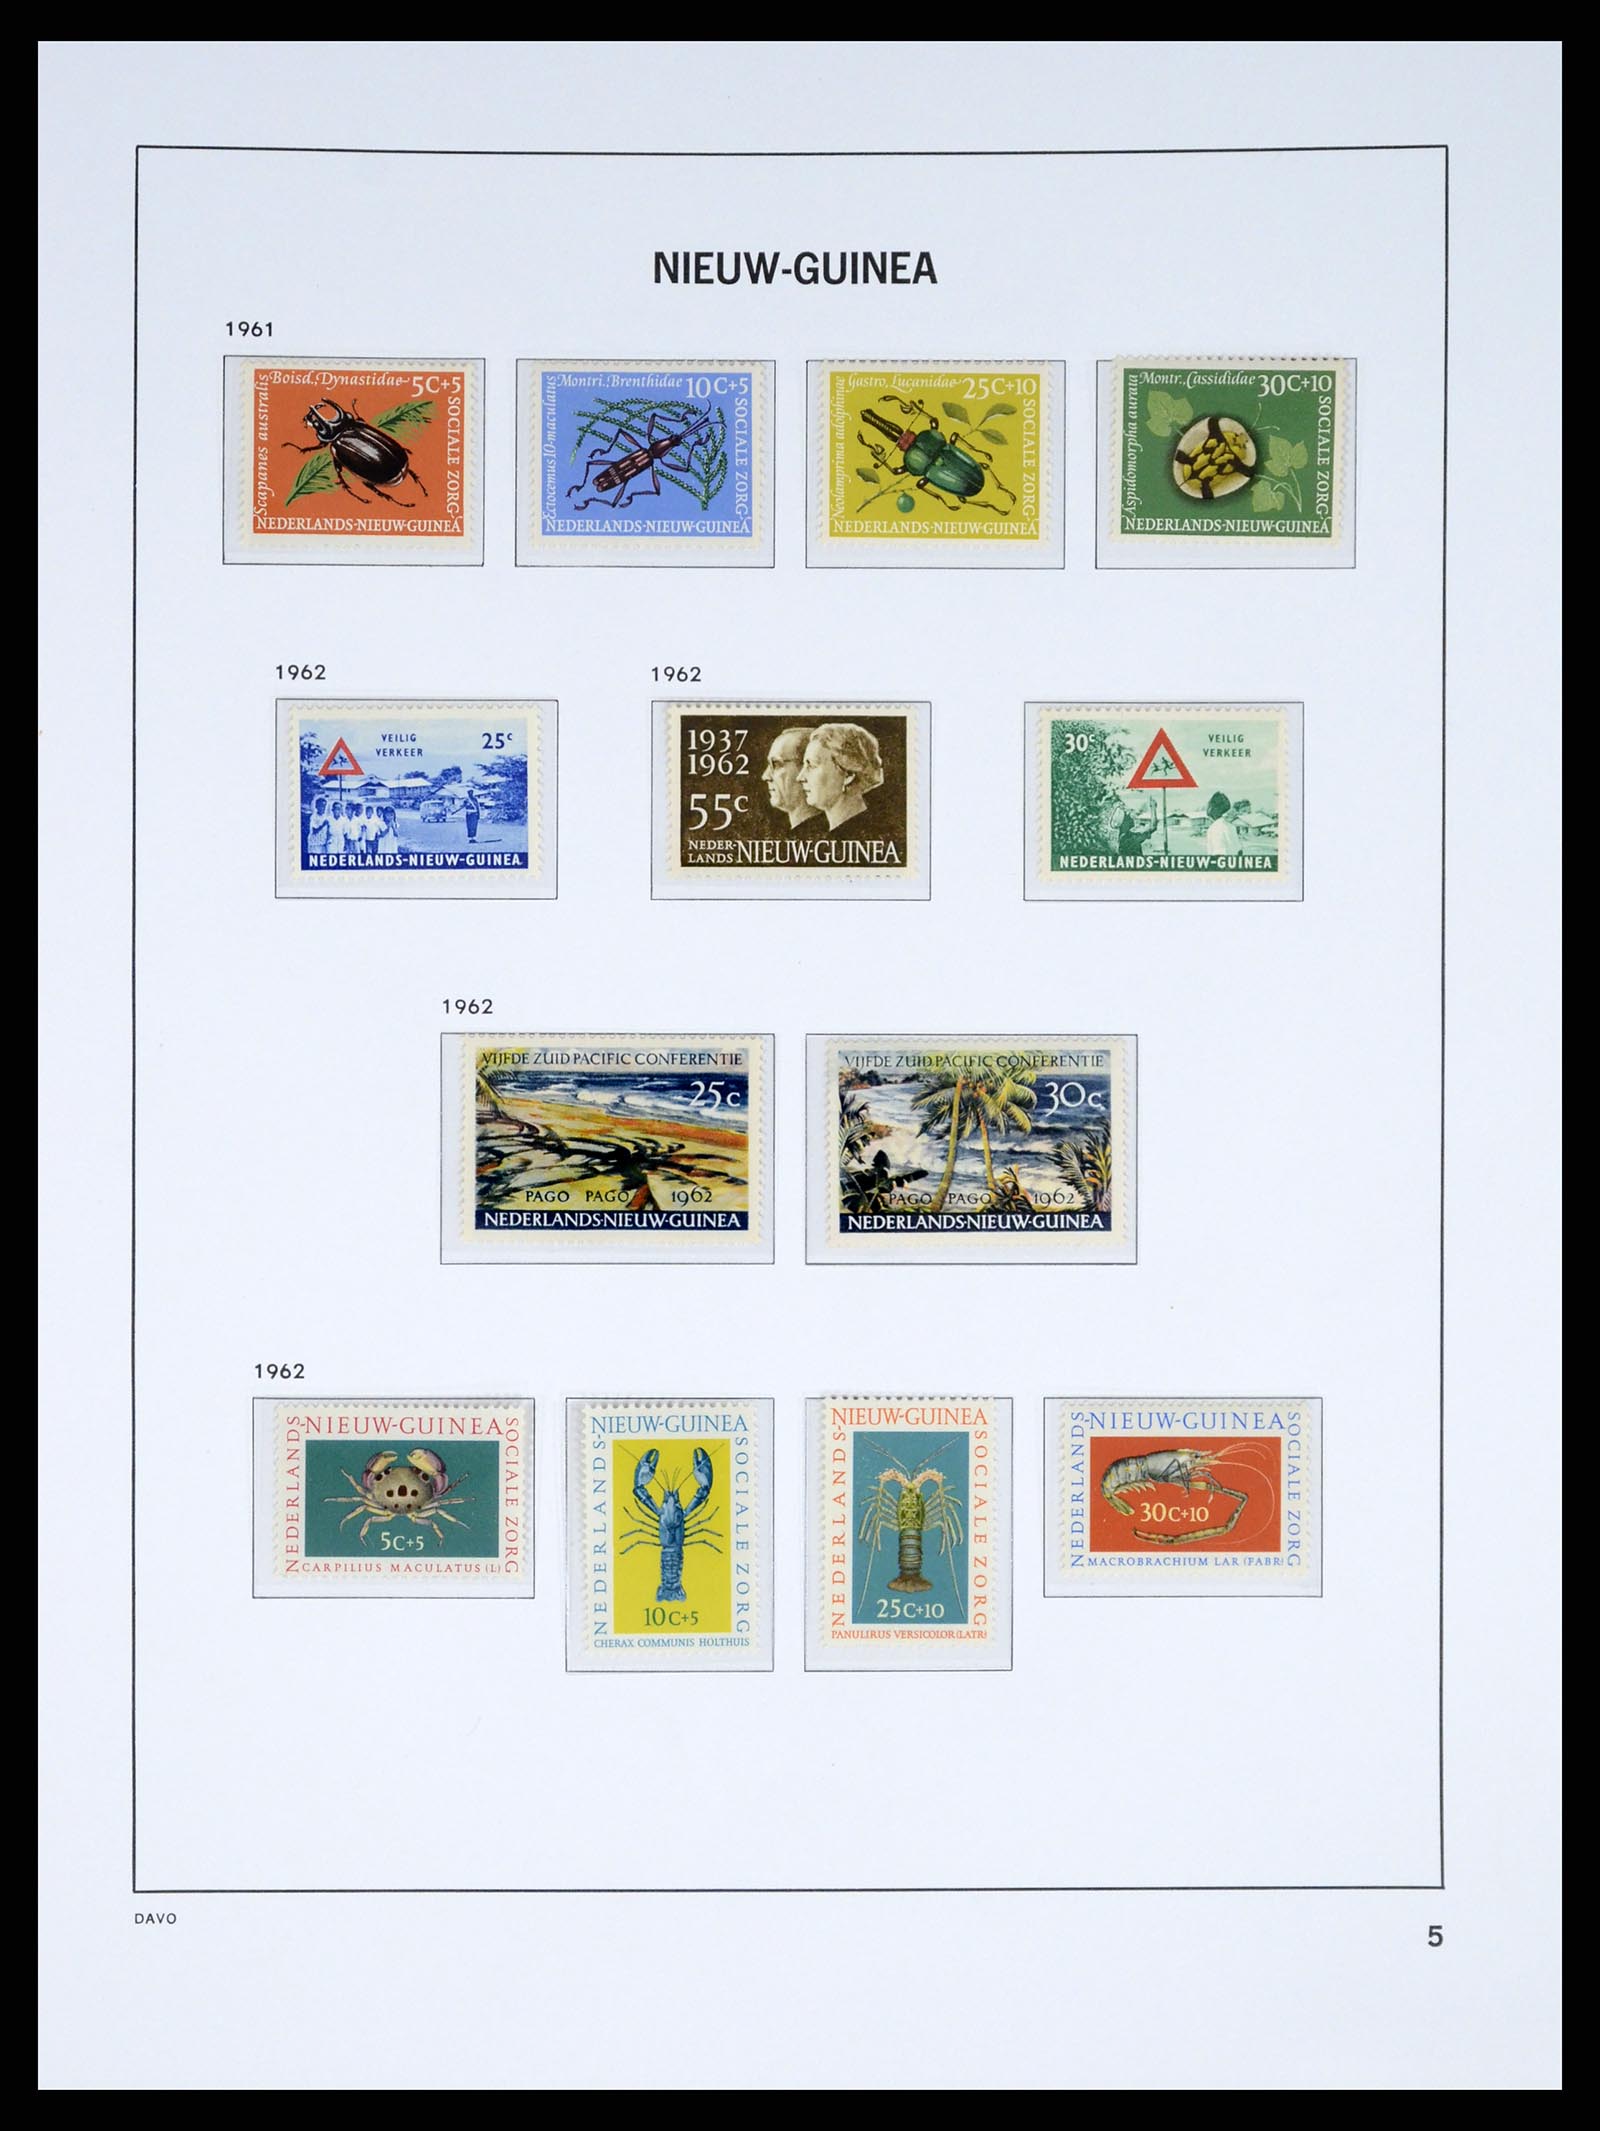 37332 038 - Stamp collection 37332 Dutch East Indies 1864-1949.